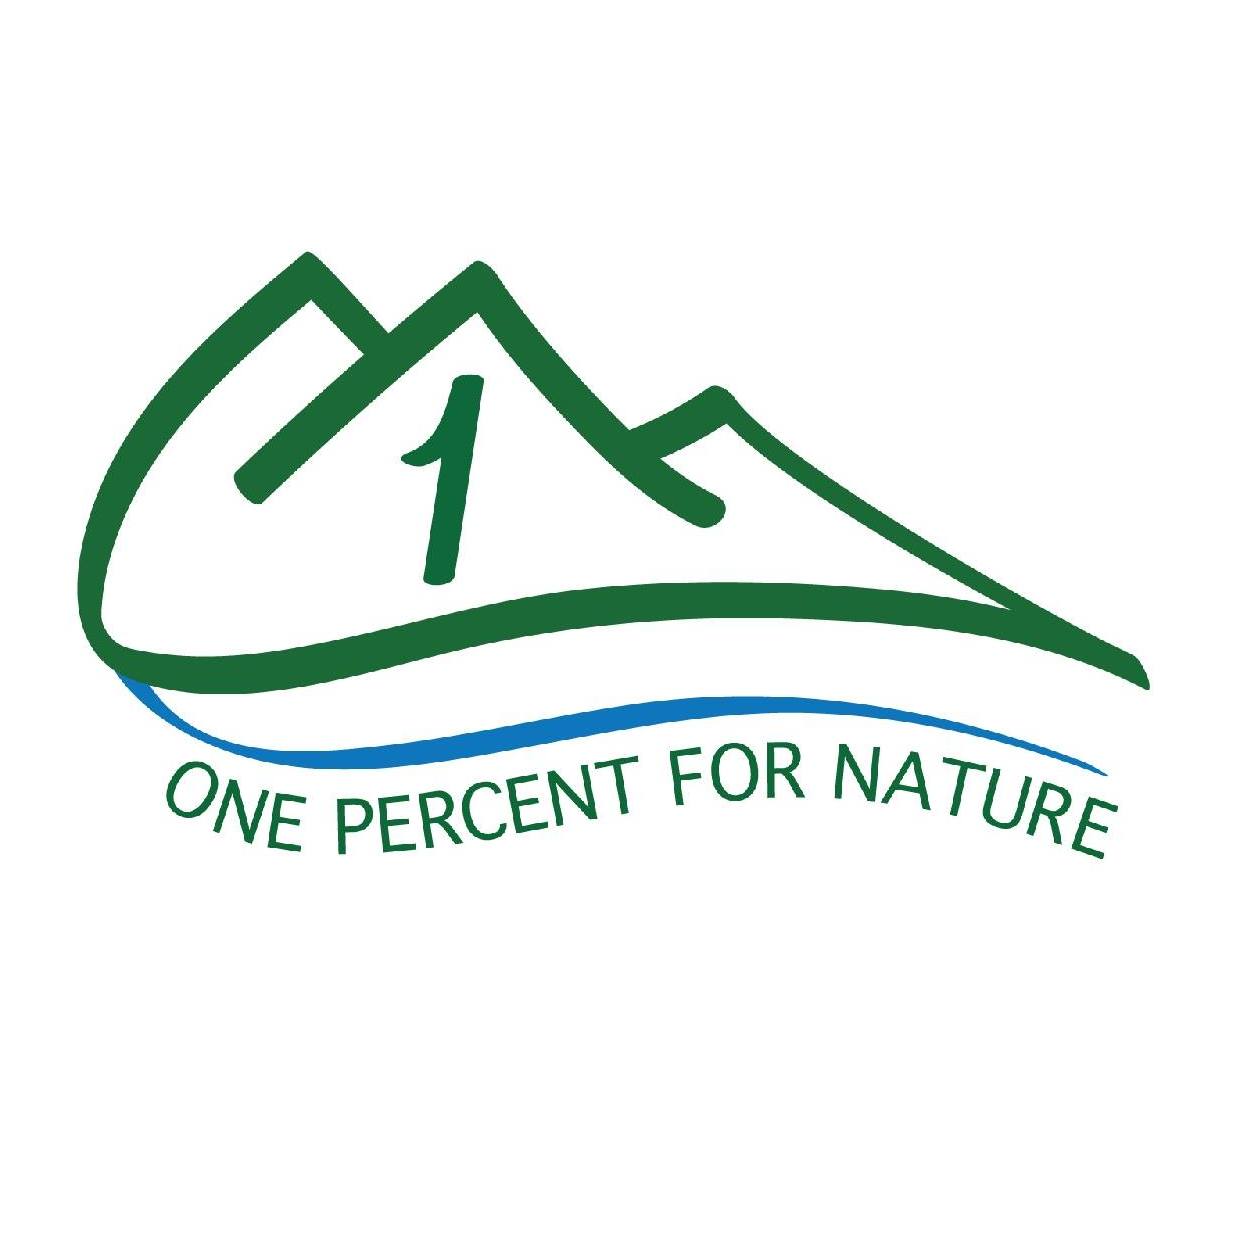 One Percent for Nature